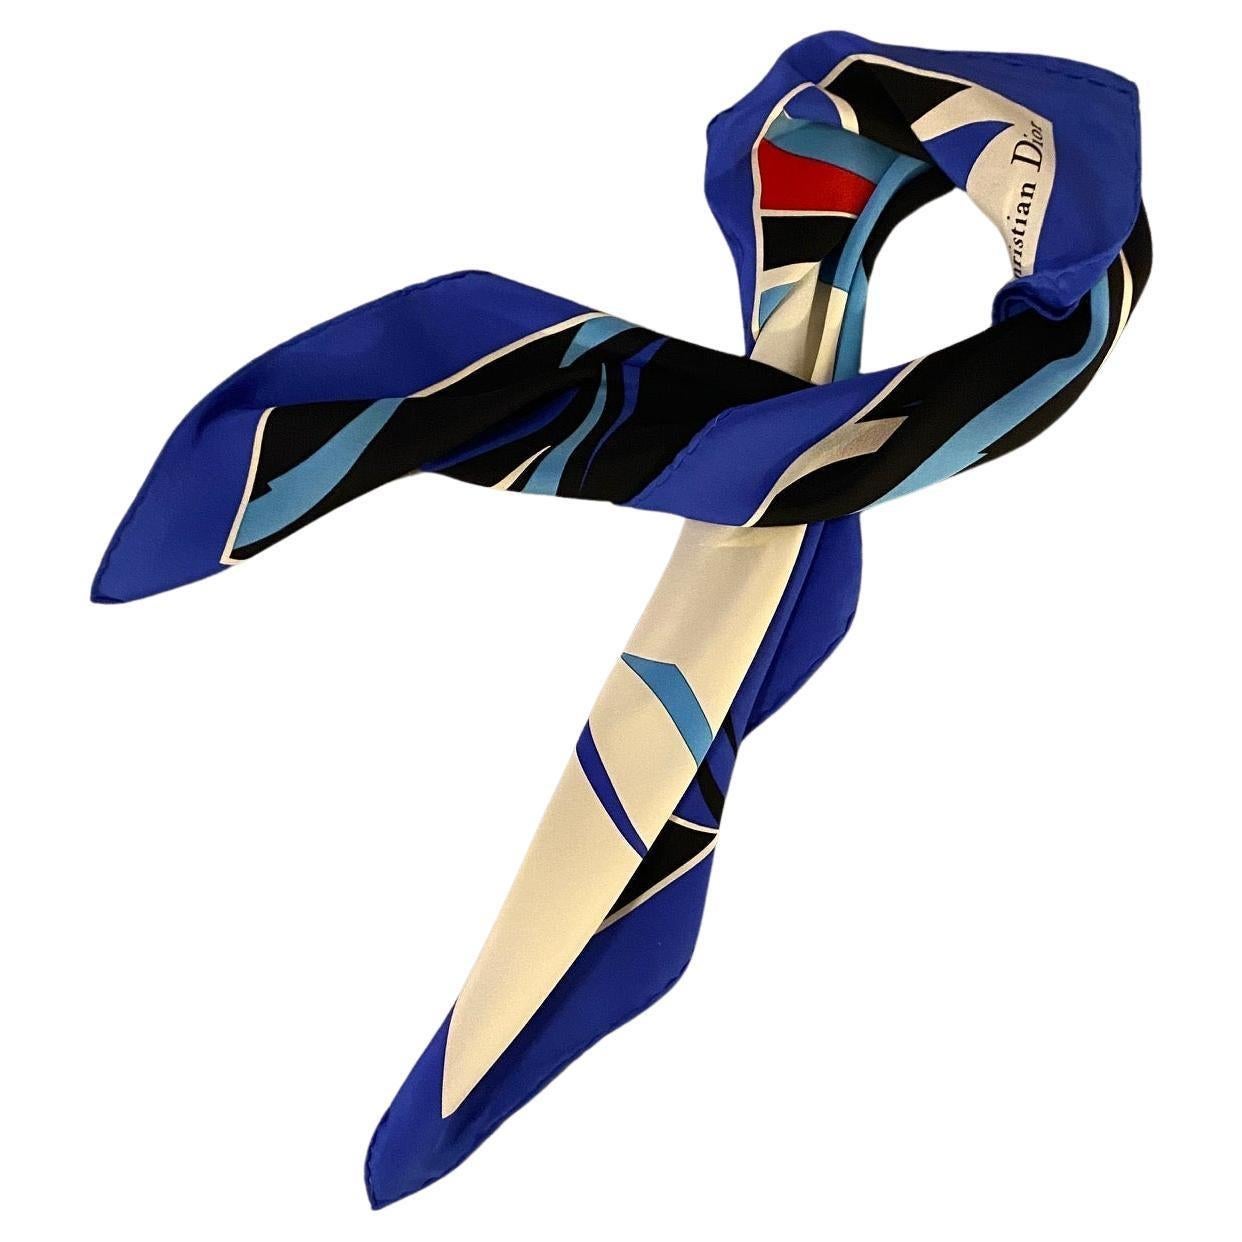 This timeless Christian Dior piece is a luxurious way to make any outfit pop. Indulge your senses with the soft, yet durable, fabric of this striking multicolor scarf (blue, baby blue, red and white)

Condition: 1980s, vintage, very good, minimal